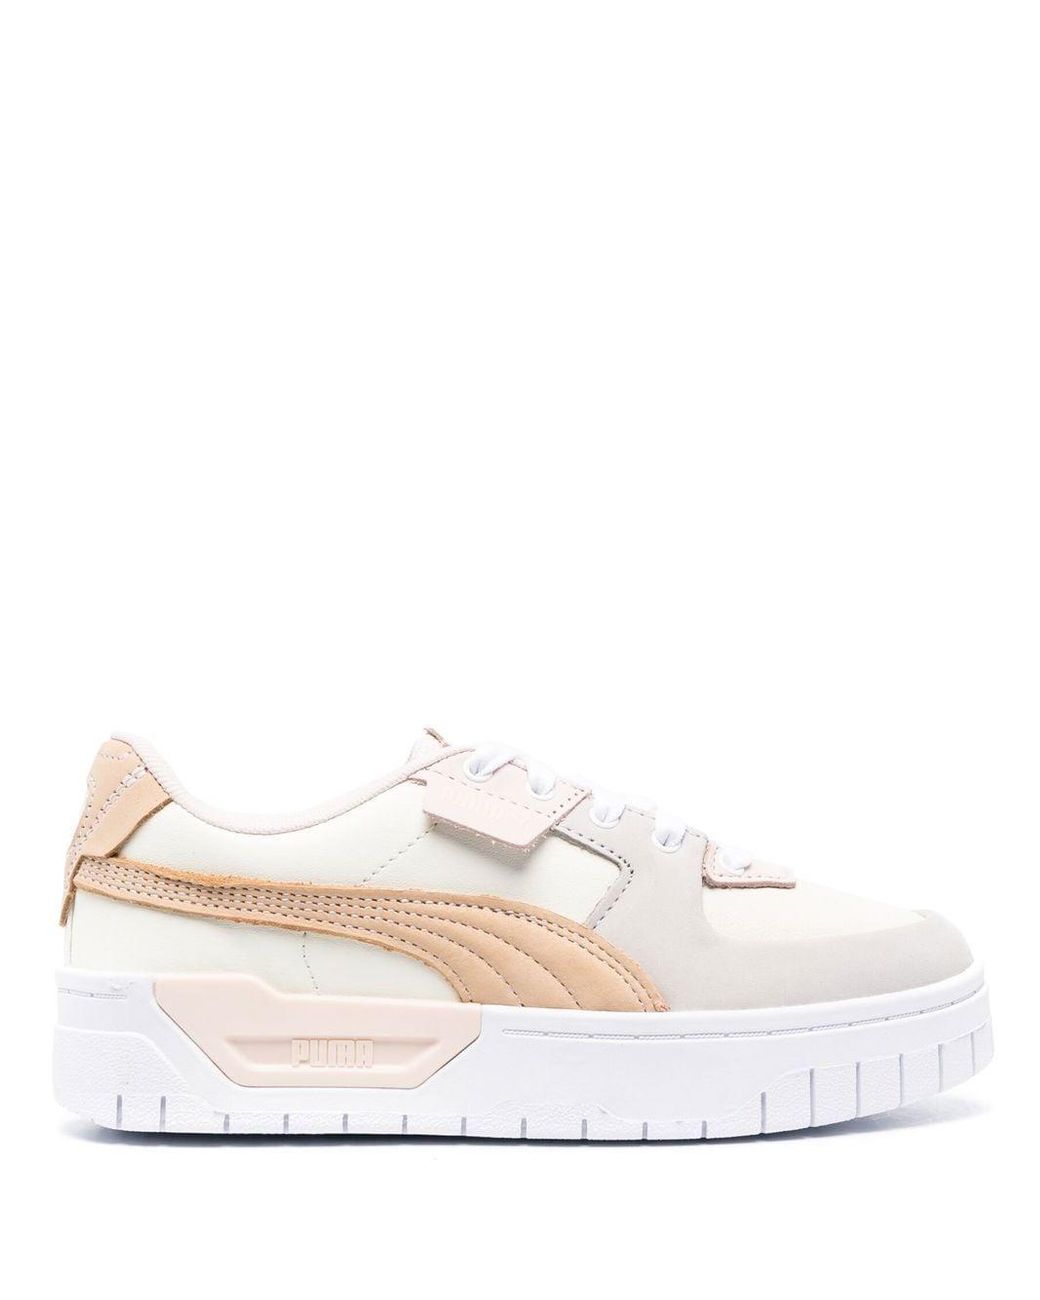 PUMA Mayze Low-top Platform Sneakers in White | Lyst